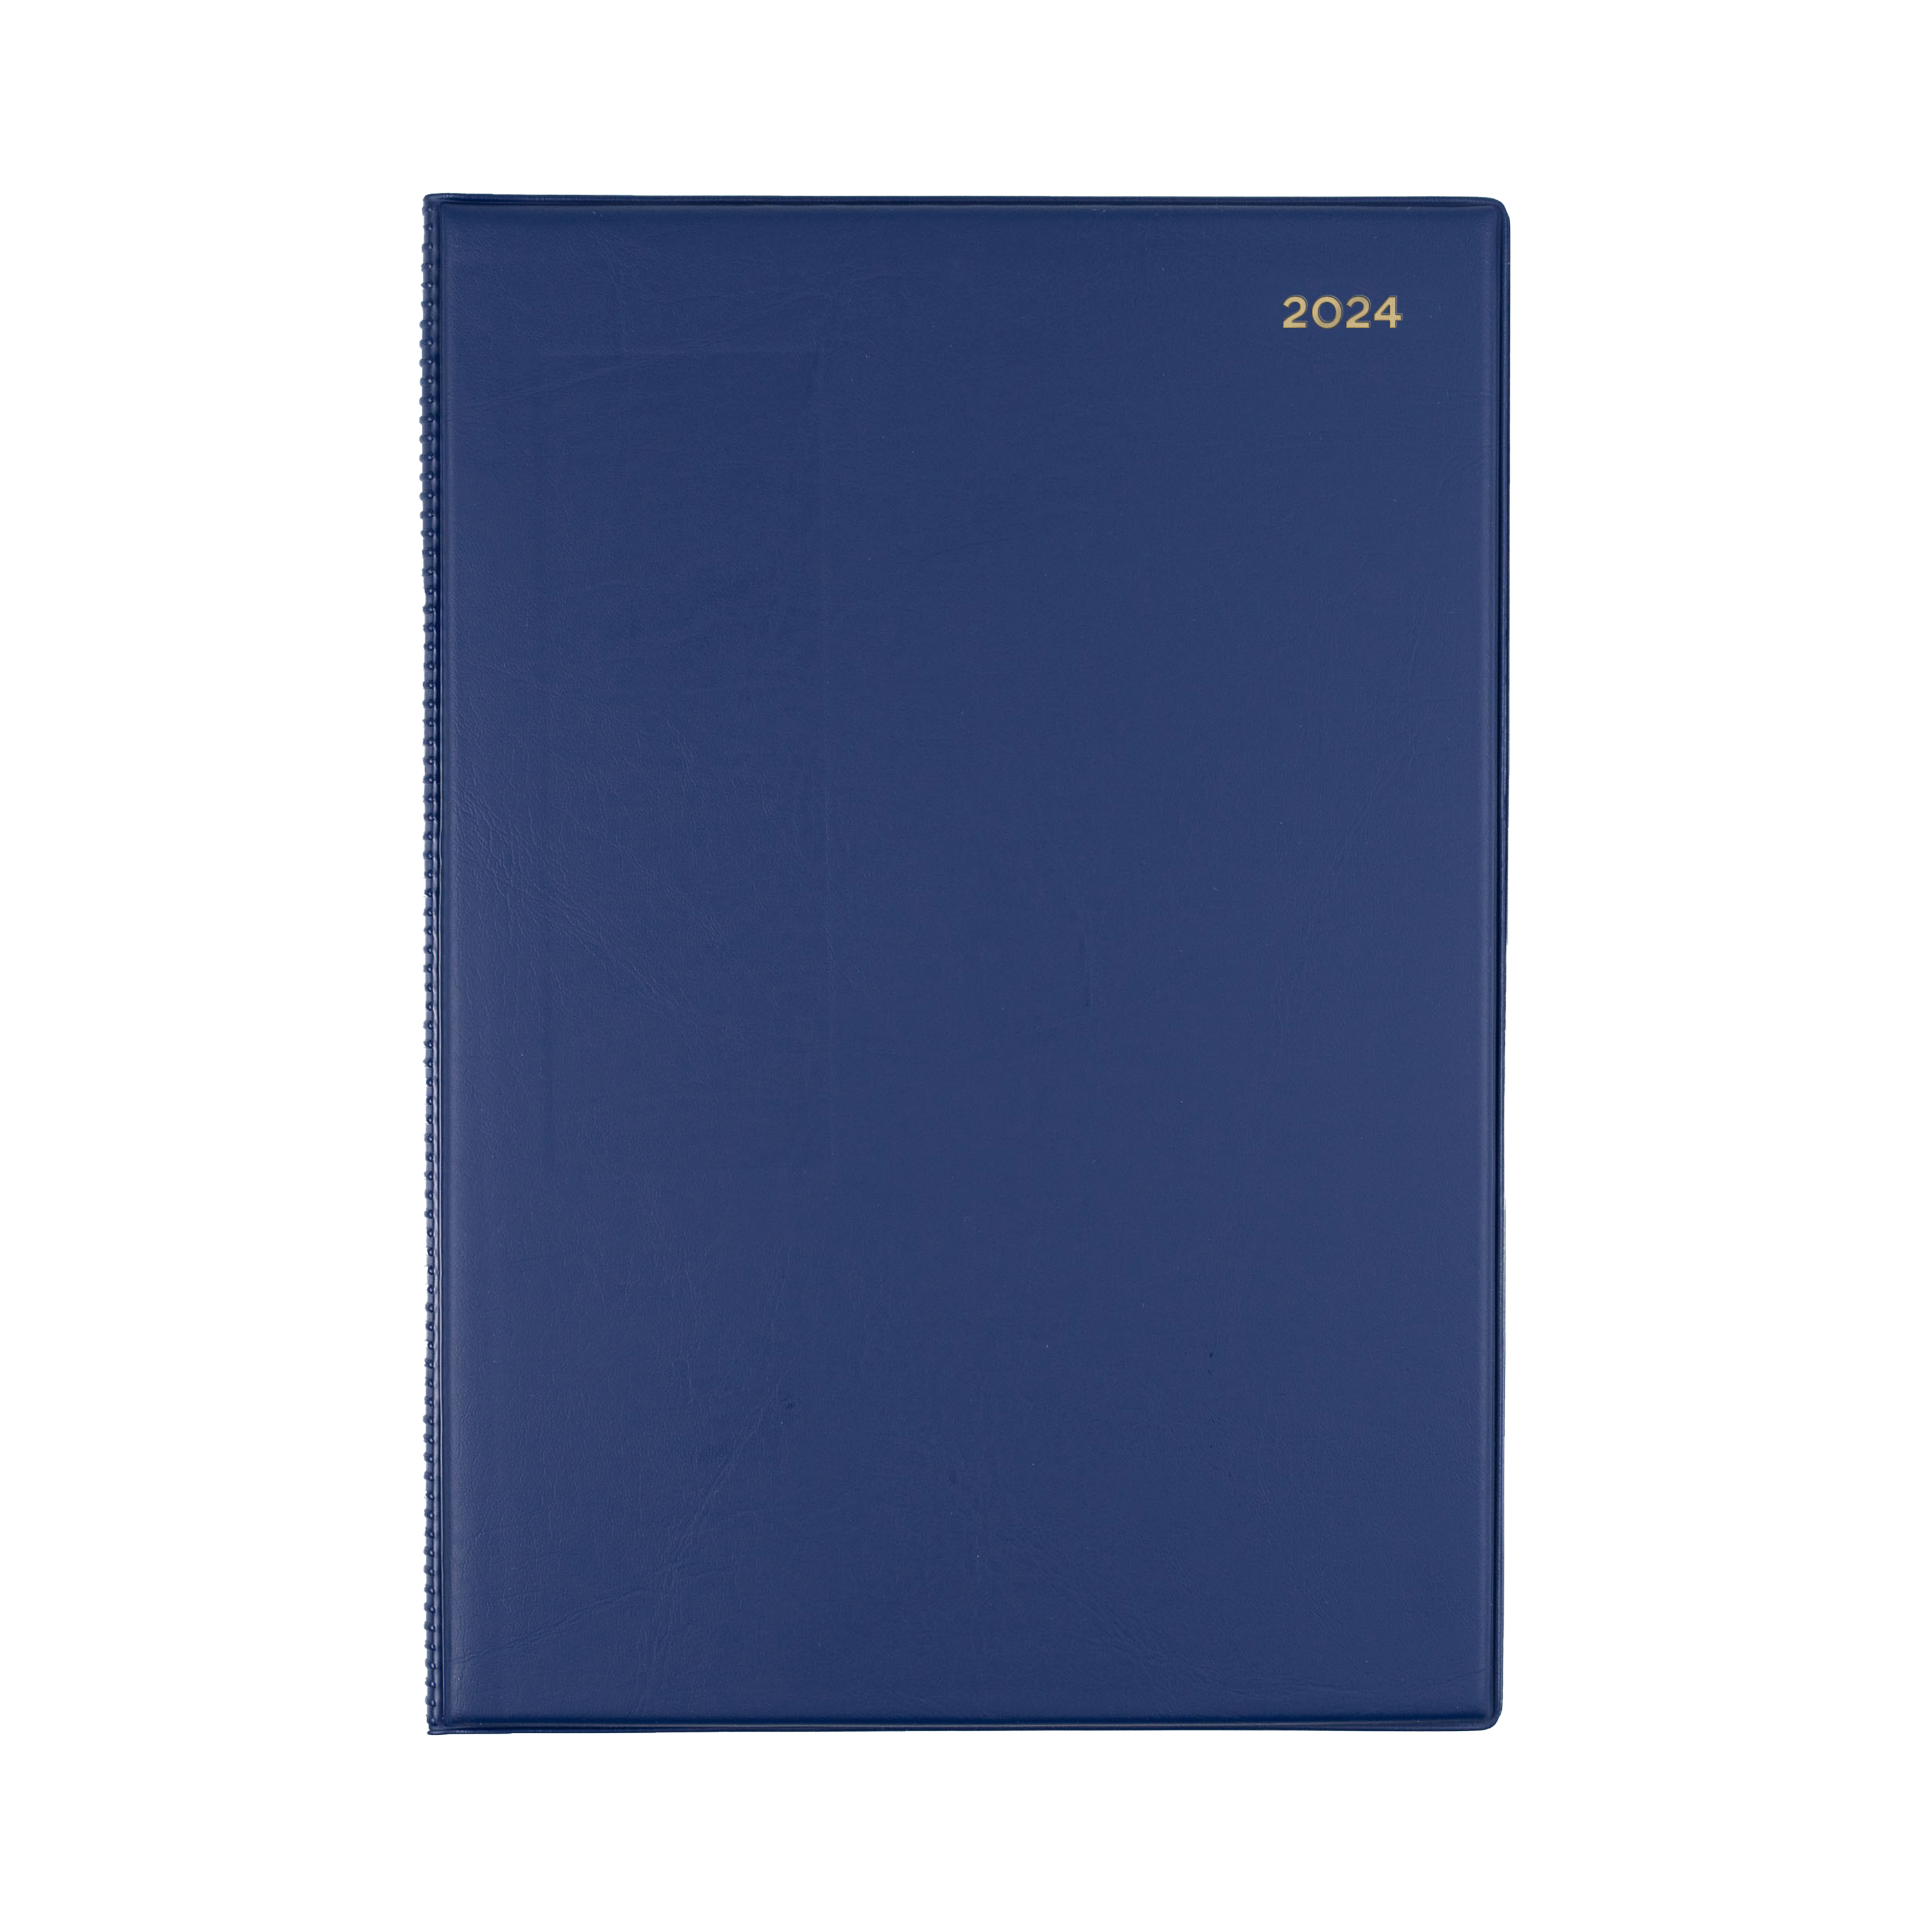 Belmont Desk 2024 Diary - Week to View, Size A4 Navy / A4 (297 x 210mm)